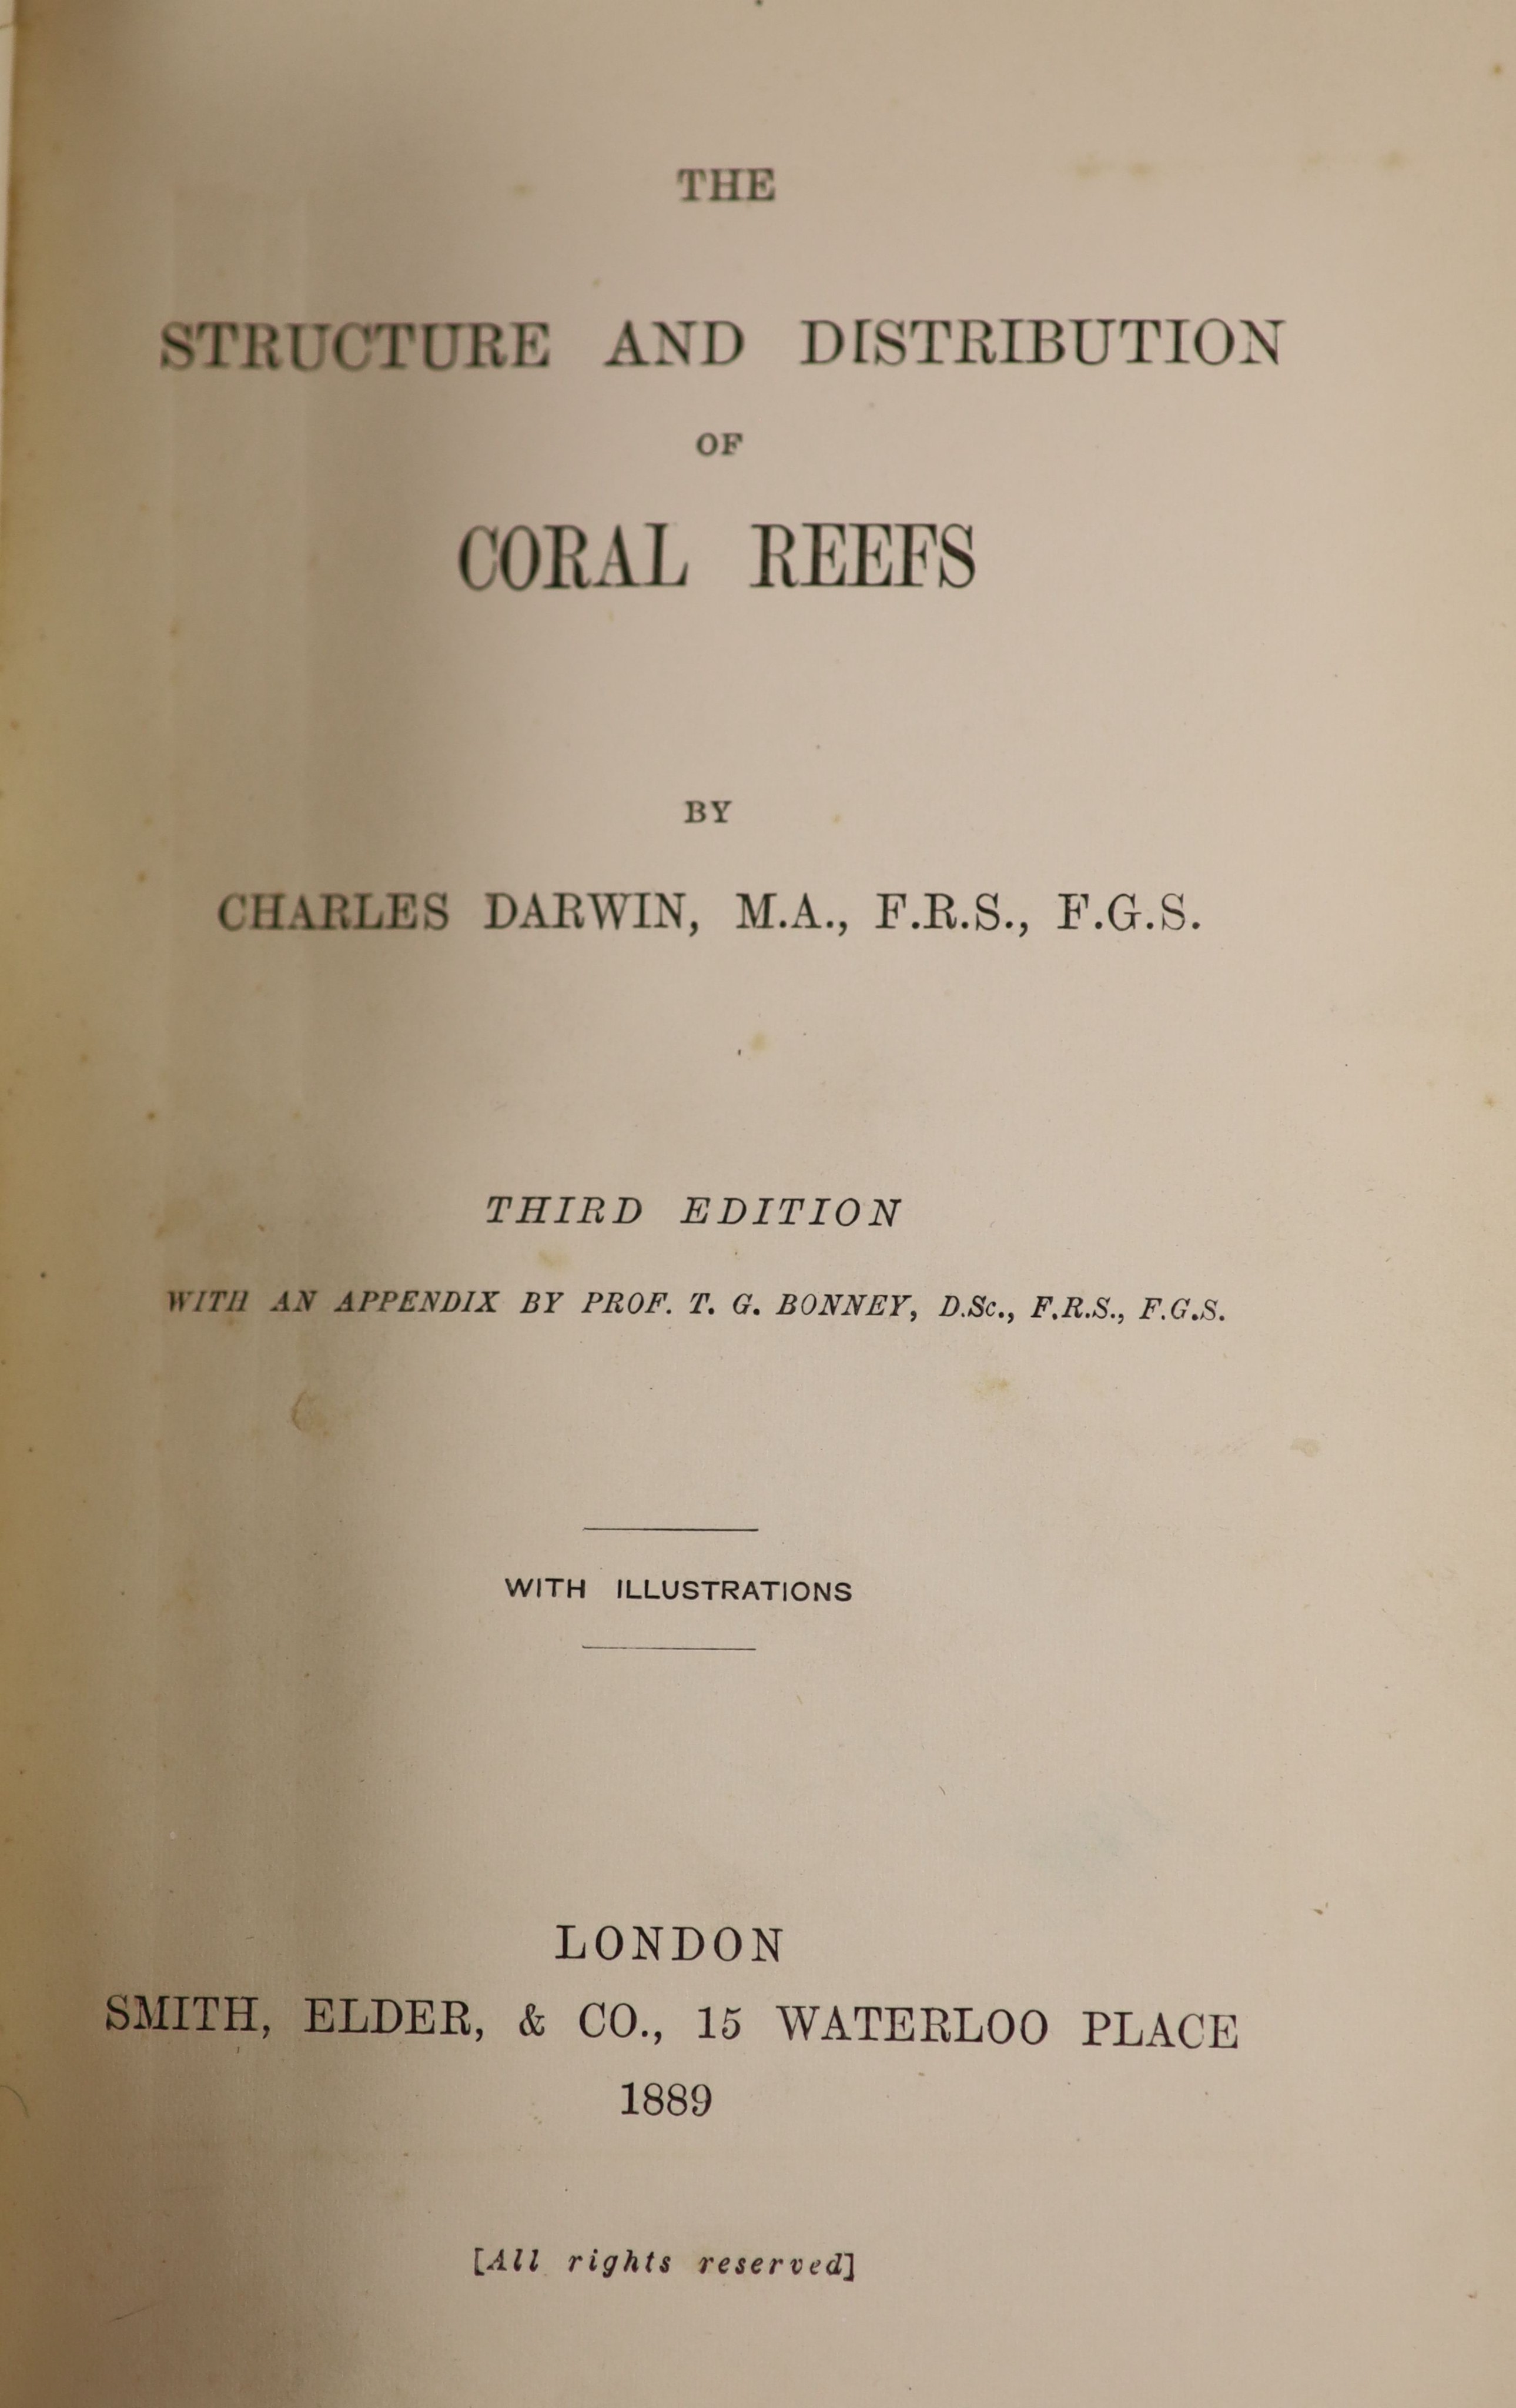 Darwin, Charles - 6 works - The Origin of Species, 6th edition, with folding table, 1886; The Various Contrivances by which Orchids are Fertilised by Insects, 2nd edition, 1888; The Formation of Vegetable Mould through t